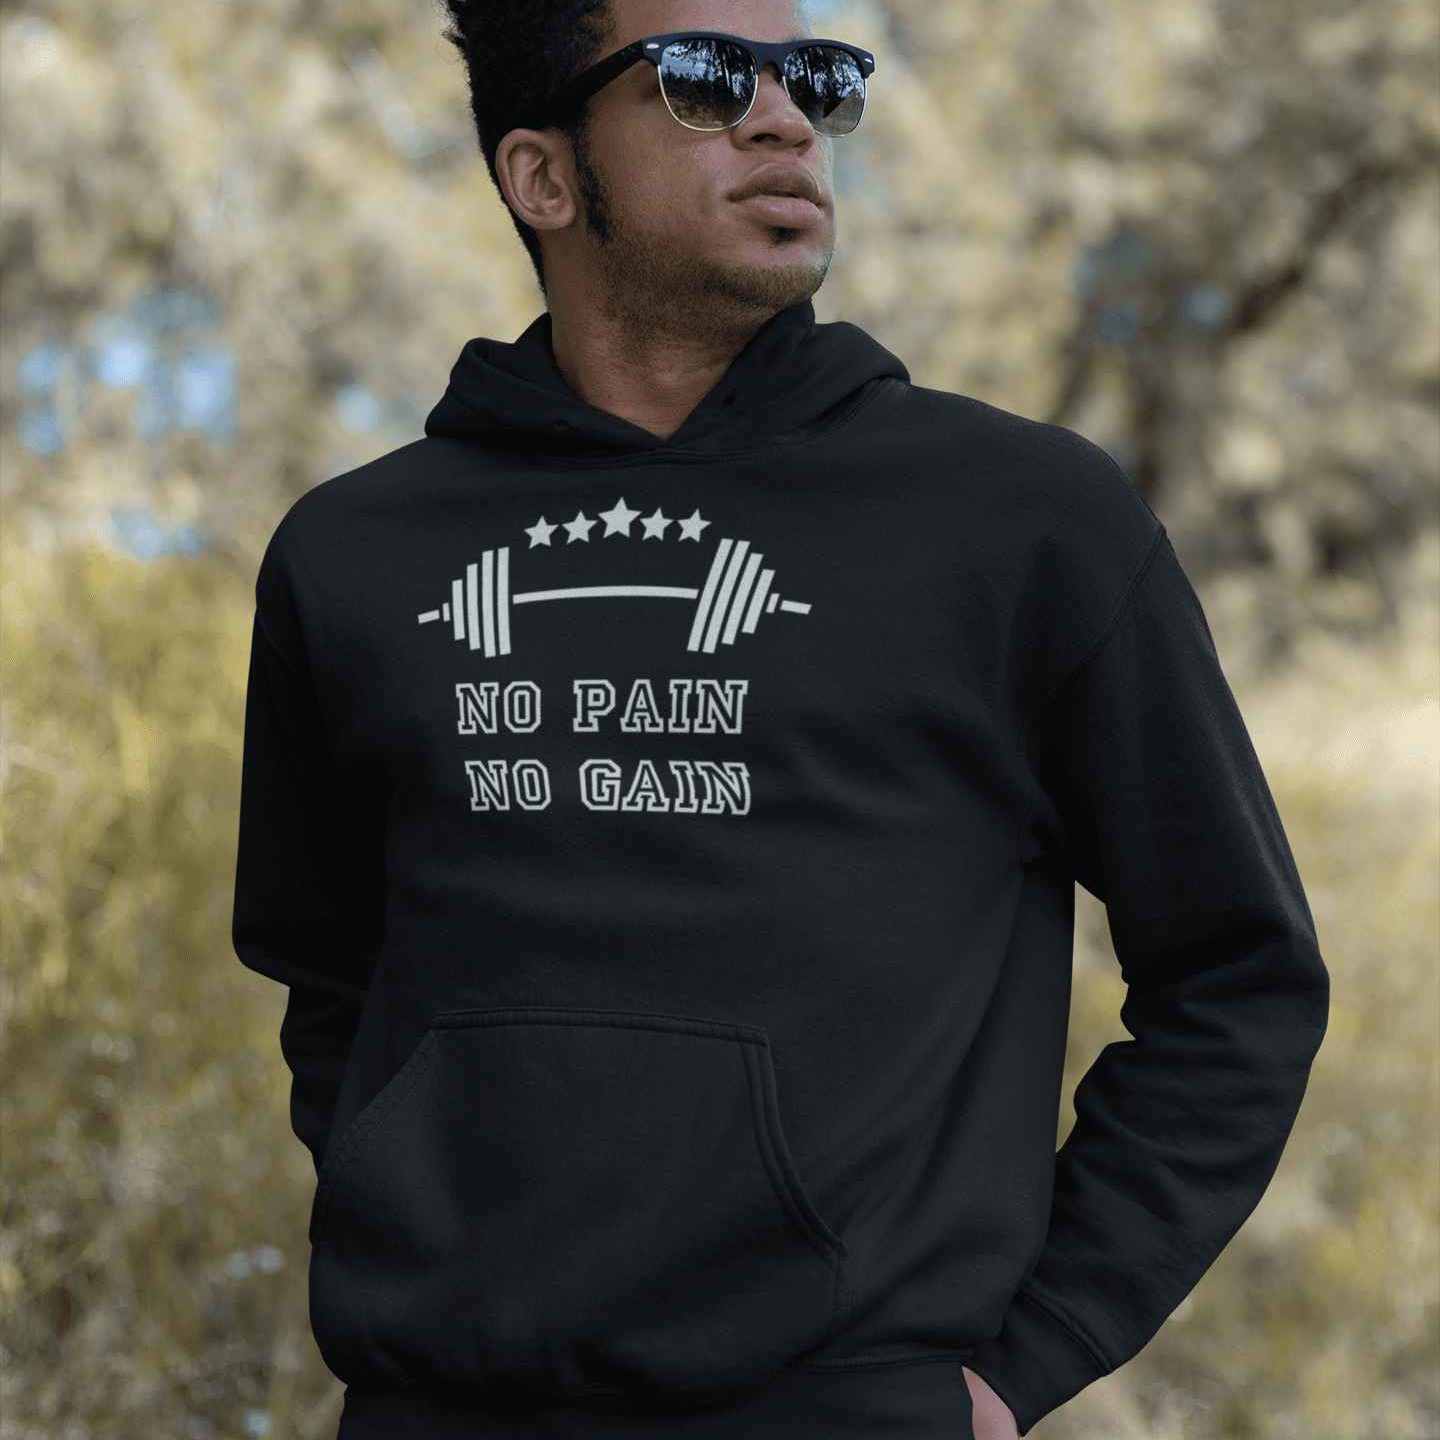 cool-mockup-featuring-a-man-wearing-a-pullover-hoodie-and-sunglasses-outdoors-23193 (1)_11zon